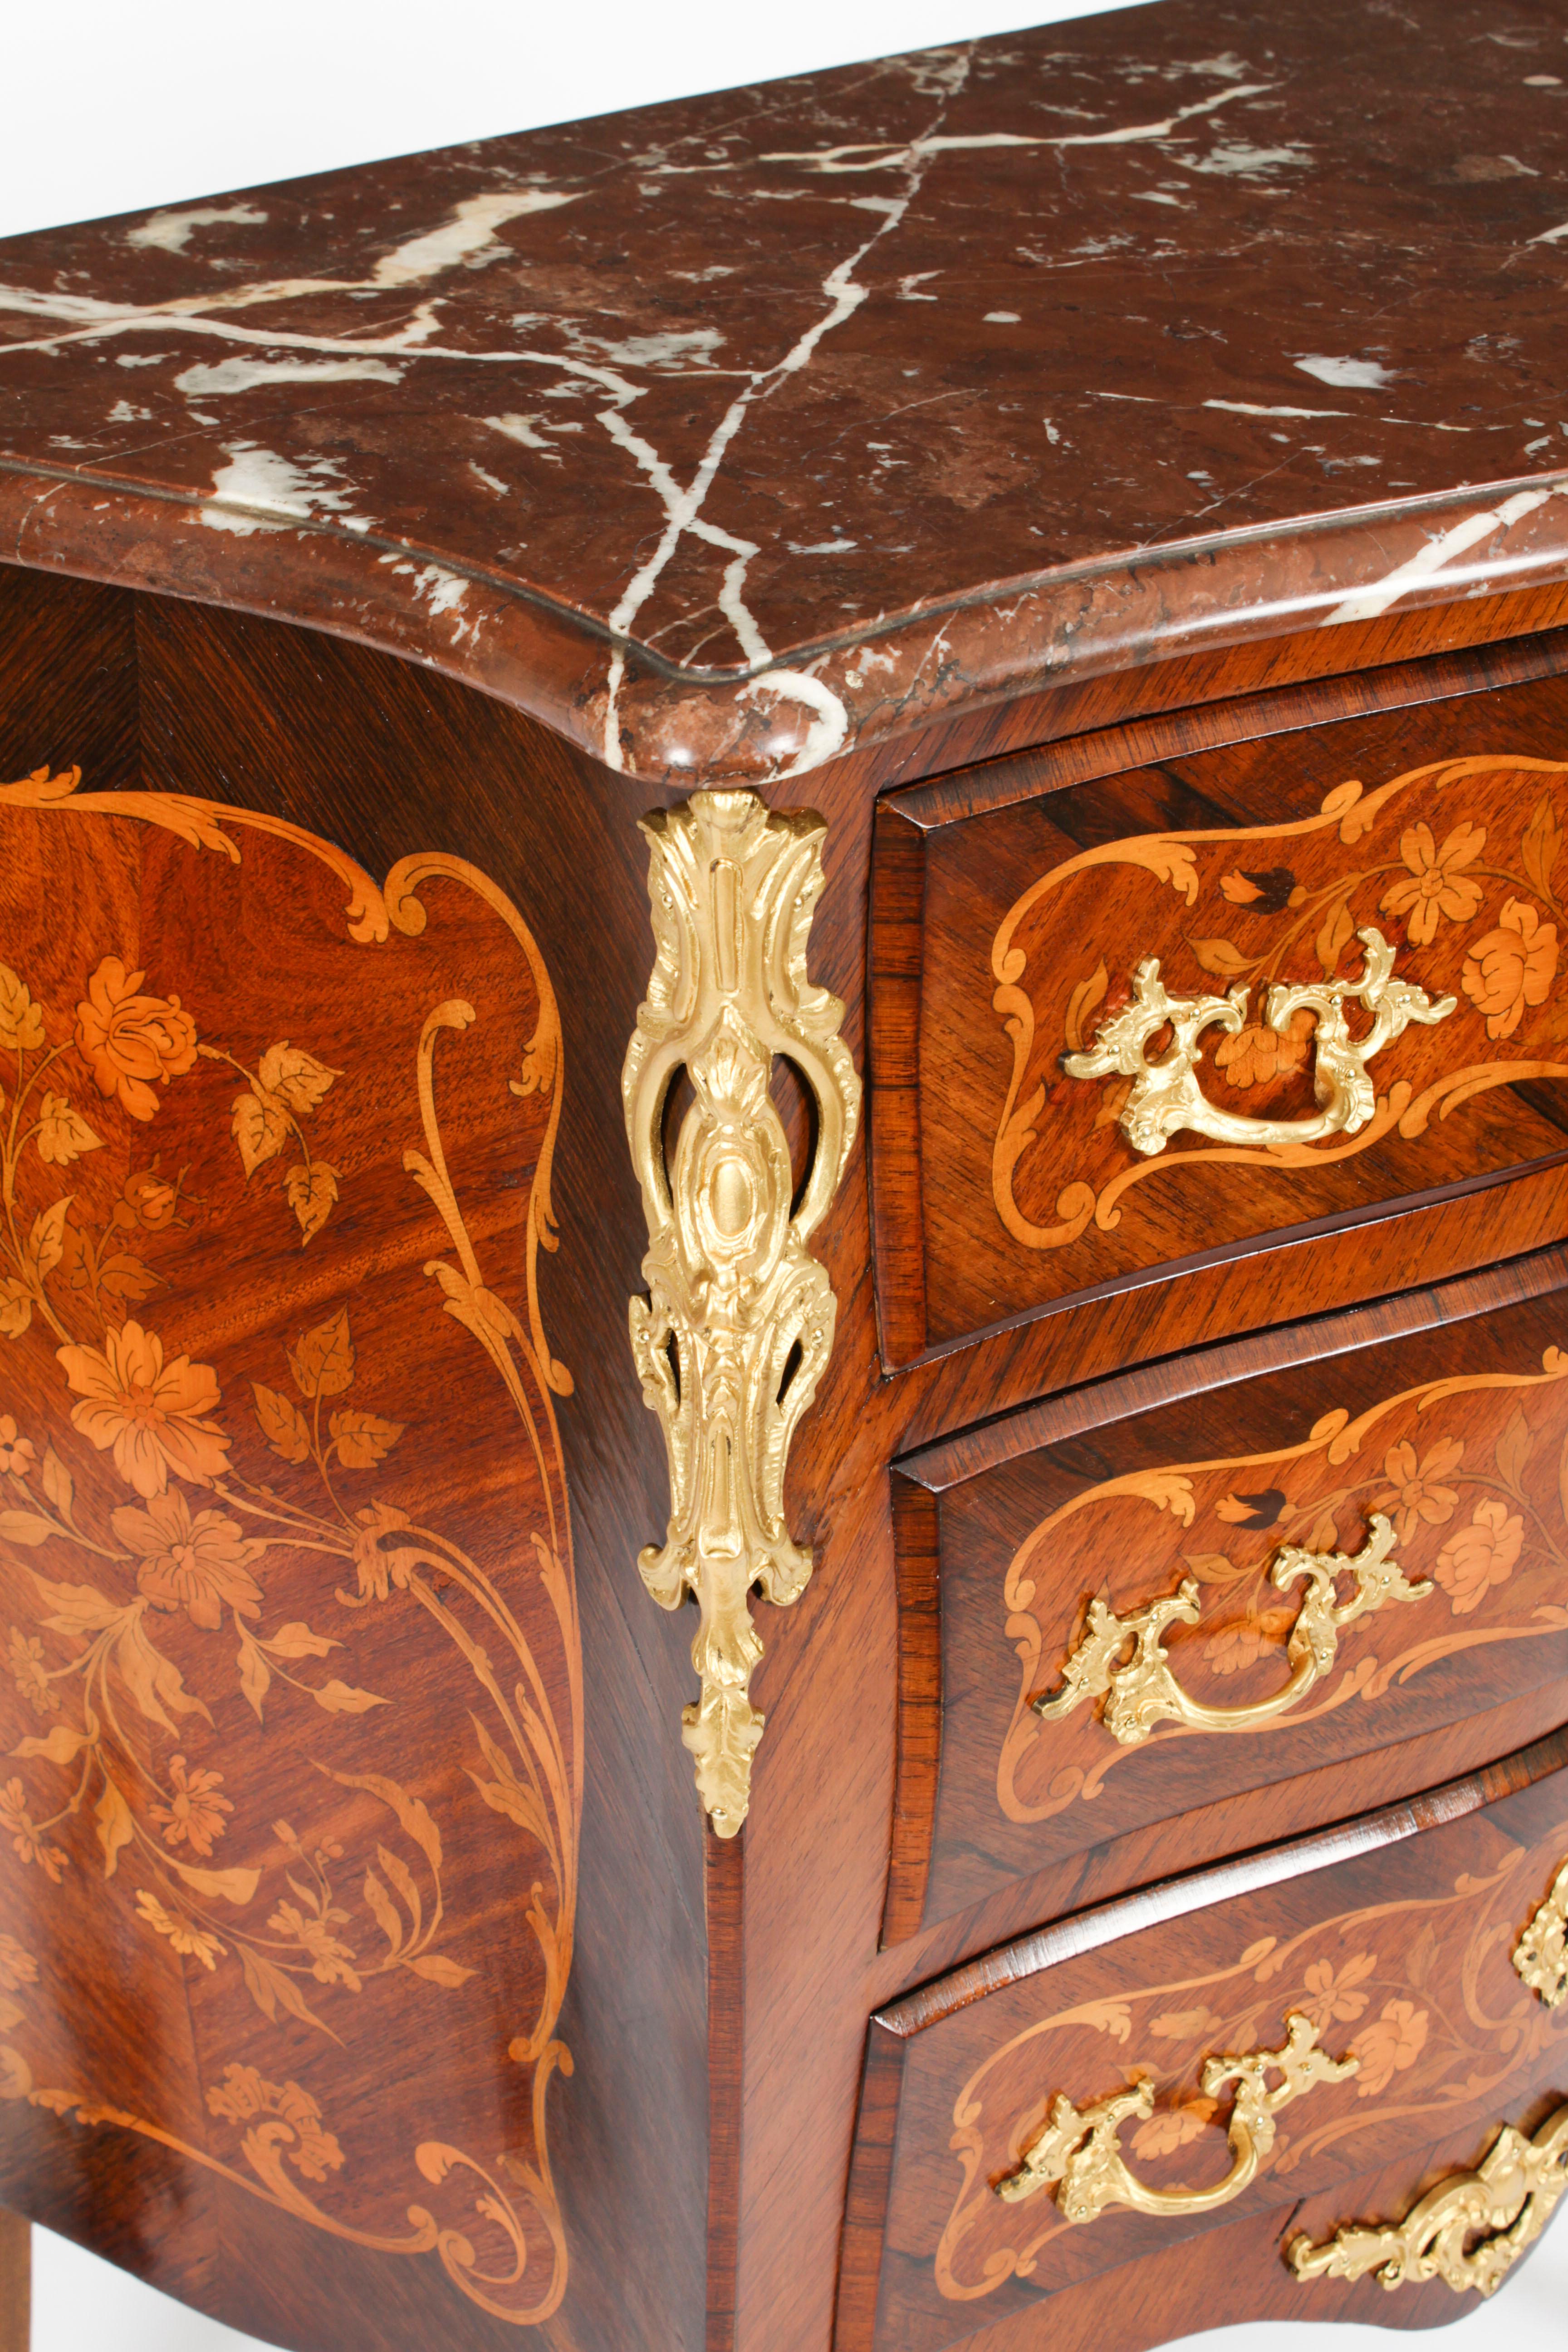 Antique French Louis Revival Gonçalo Alvest Marquetry Commode 19th Century For Sale 9